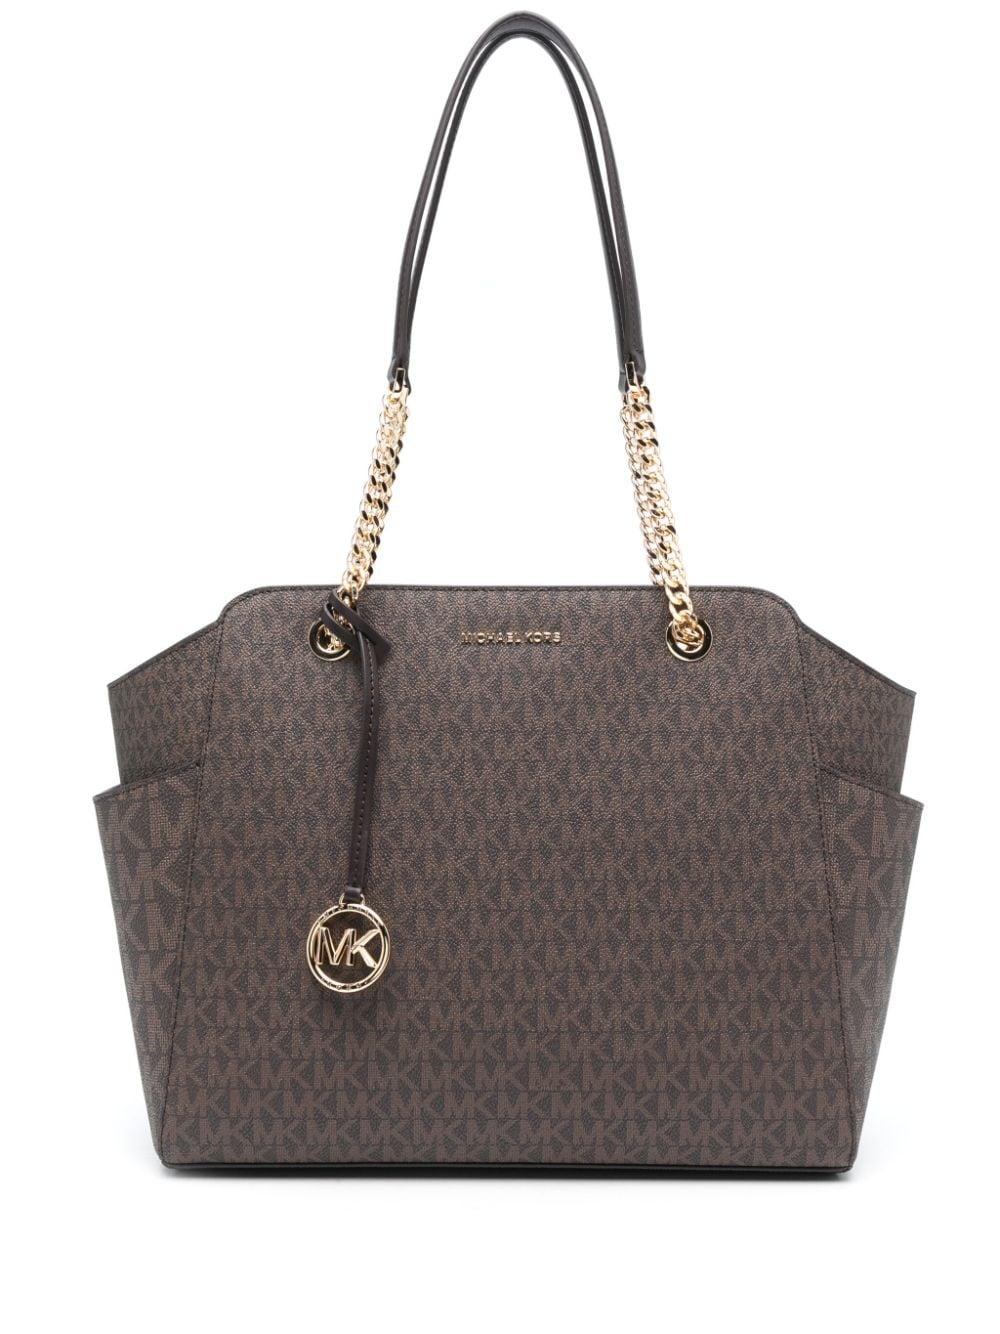 Shop for Michael Kors Mercer Large Convertible Tote Purple - Shipped from  USA